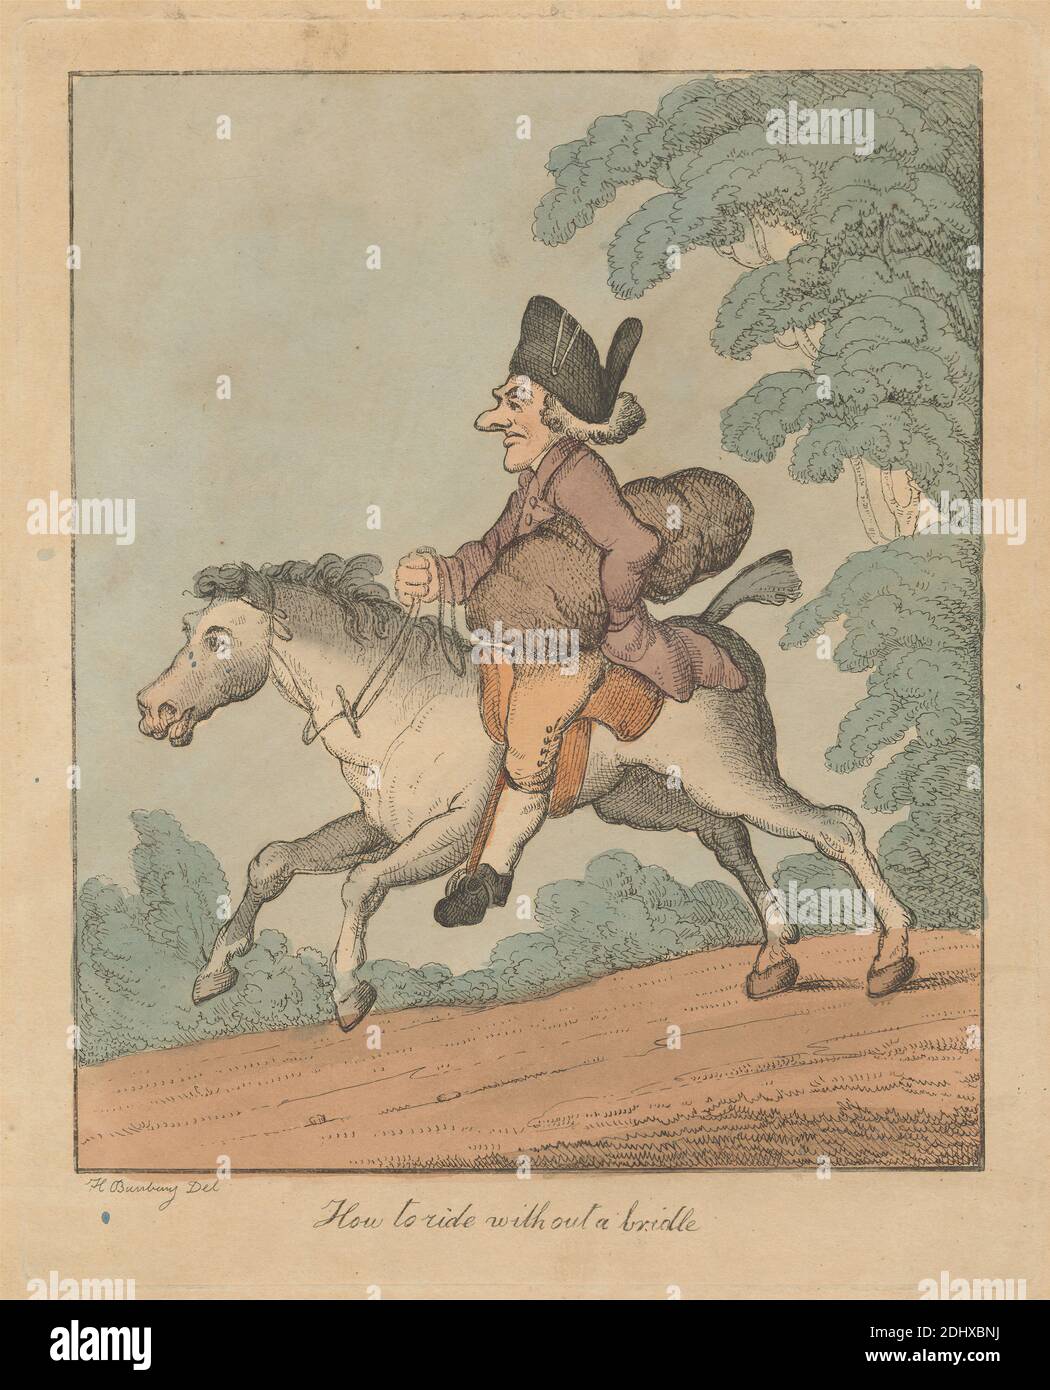 How to Ride Without a Bridle, Print made by Henry William Bunbury, 1750–1811, British, undated, Hand-colored etching on thick beige card, Sheet: 12 1/2 x 9 5/8 inches (31.7 x 24.5 cm), Plate: 9 15/16 x 7 15/16 inches (25.2 x 20.2 cm), and Image: 8 11/16 x 7 3/16 inches (22 x 18.2 cm), bridle, bundle, caricature, coat, genre subject, hat, horse (animal), man, nose, riding, road, saddle, satire, trees Stock Photo